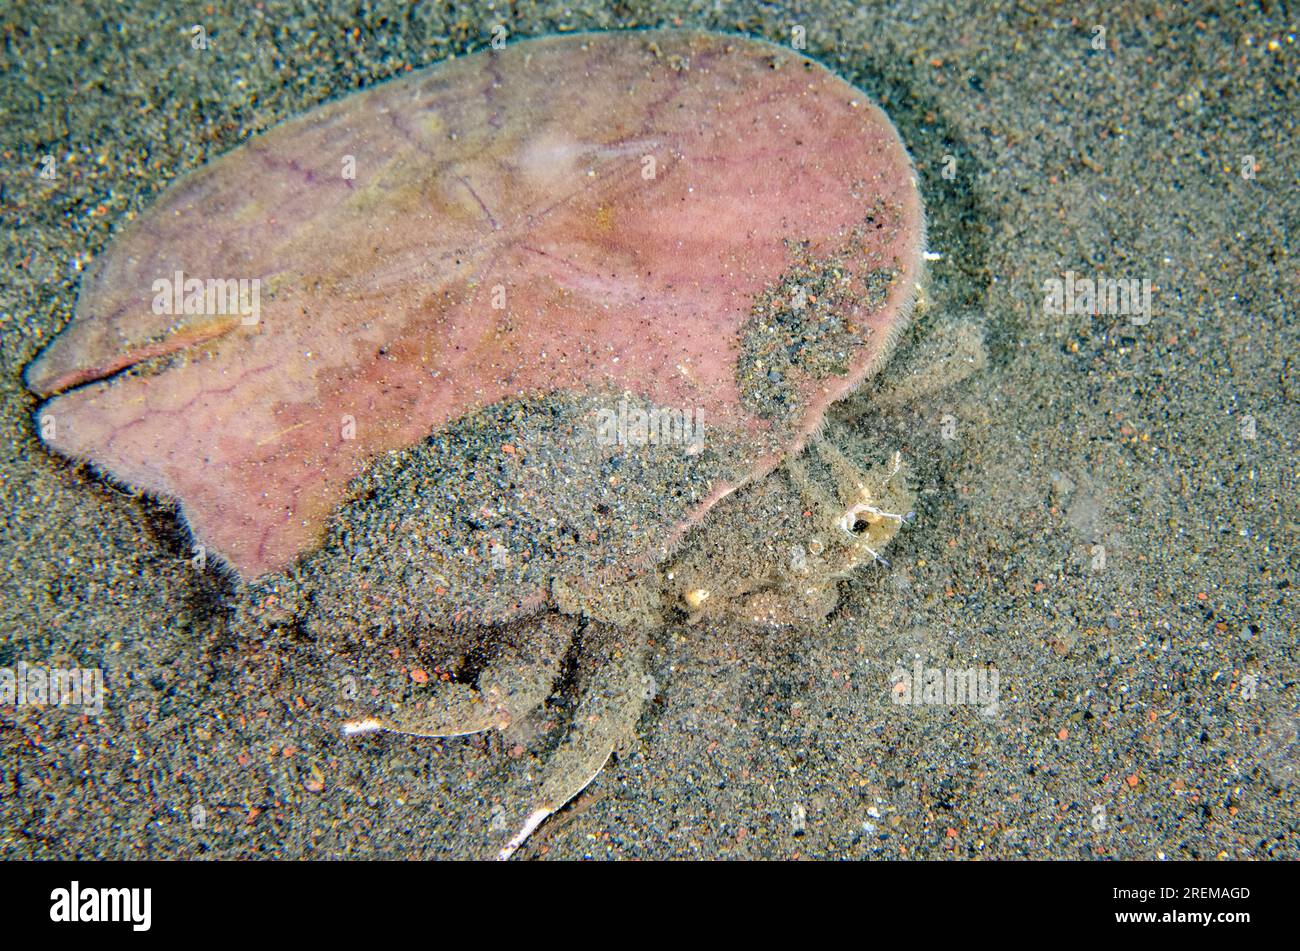 Doripped Urchin Crab, Dorippe frascone, carrying Pancake Sand Dollar, Sculpsitechinus auritus, for protection and camouflage, Puri Jati dive site, Ser Stock Photo